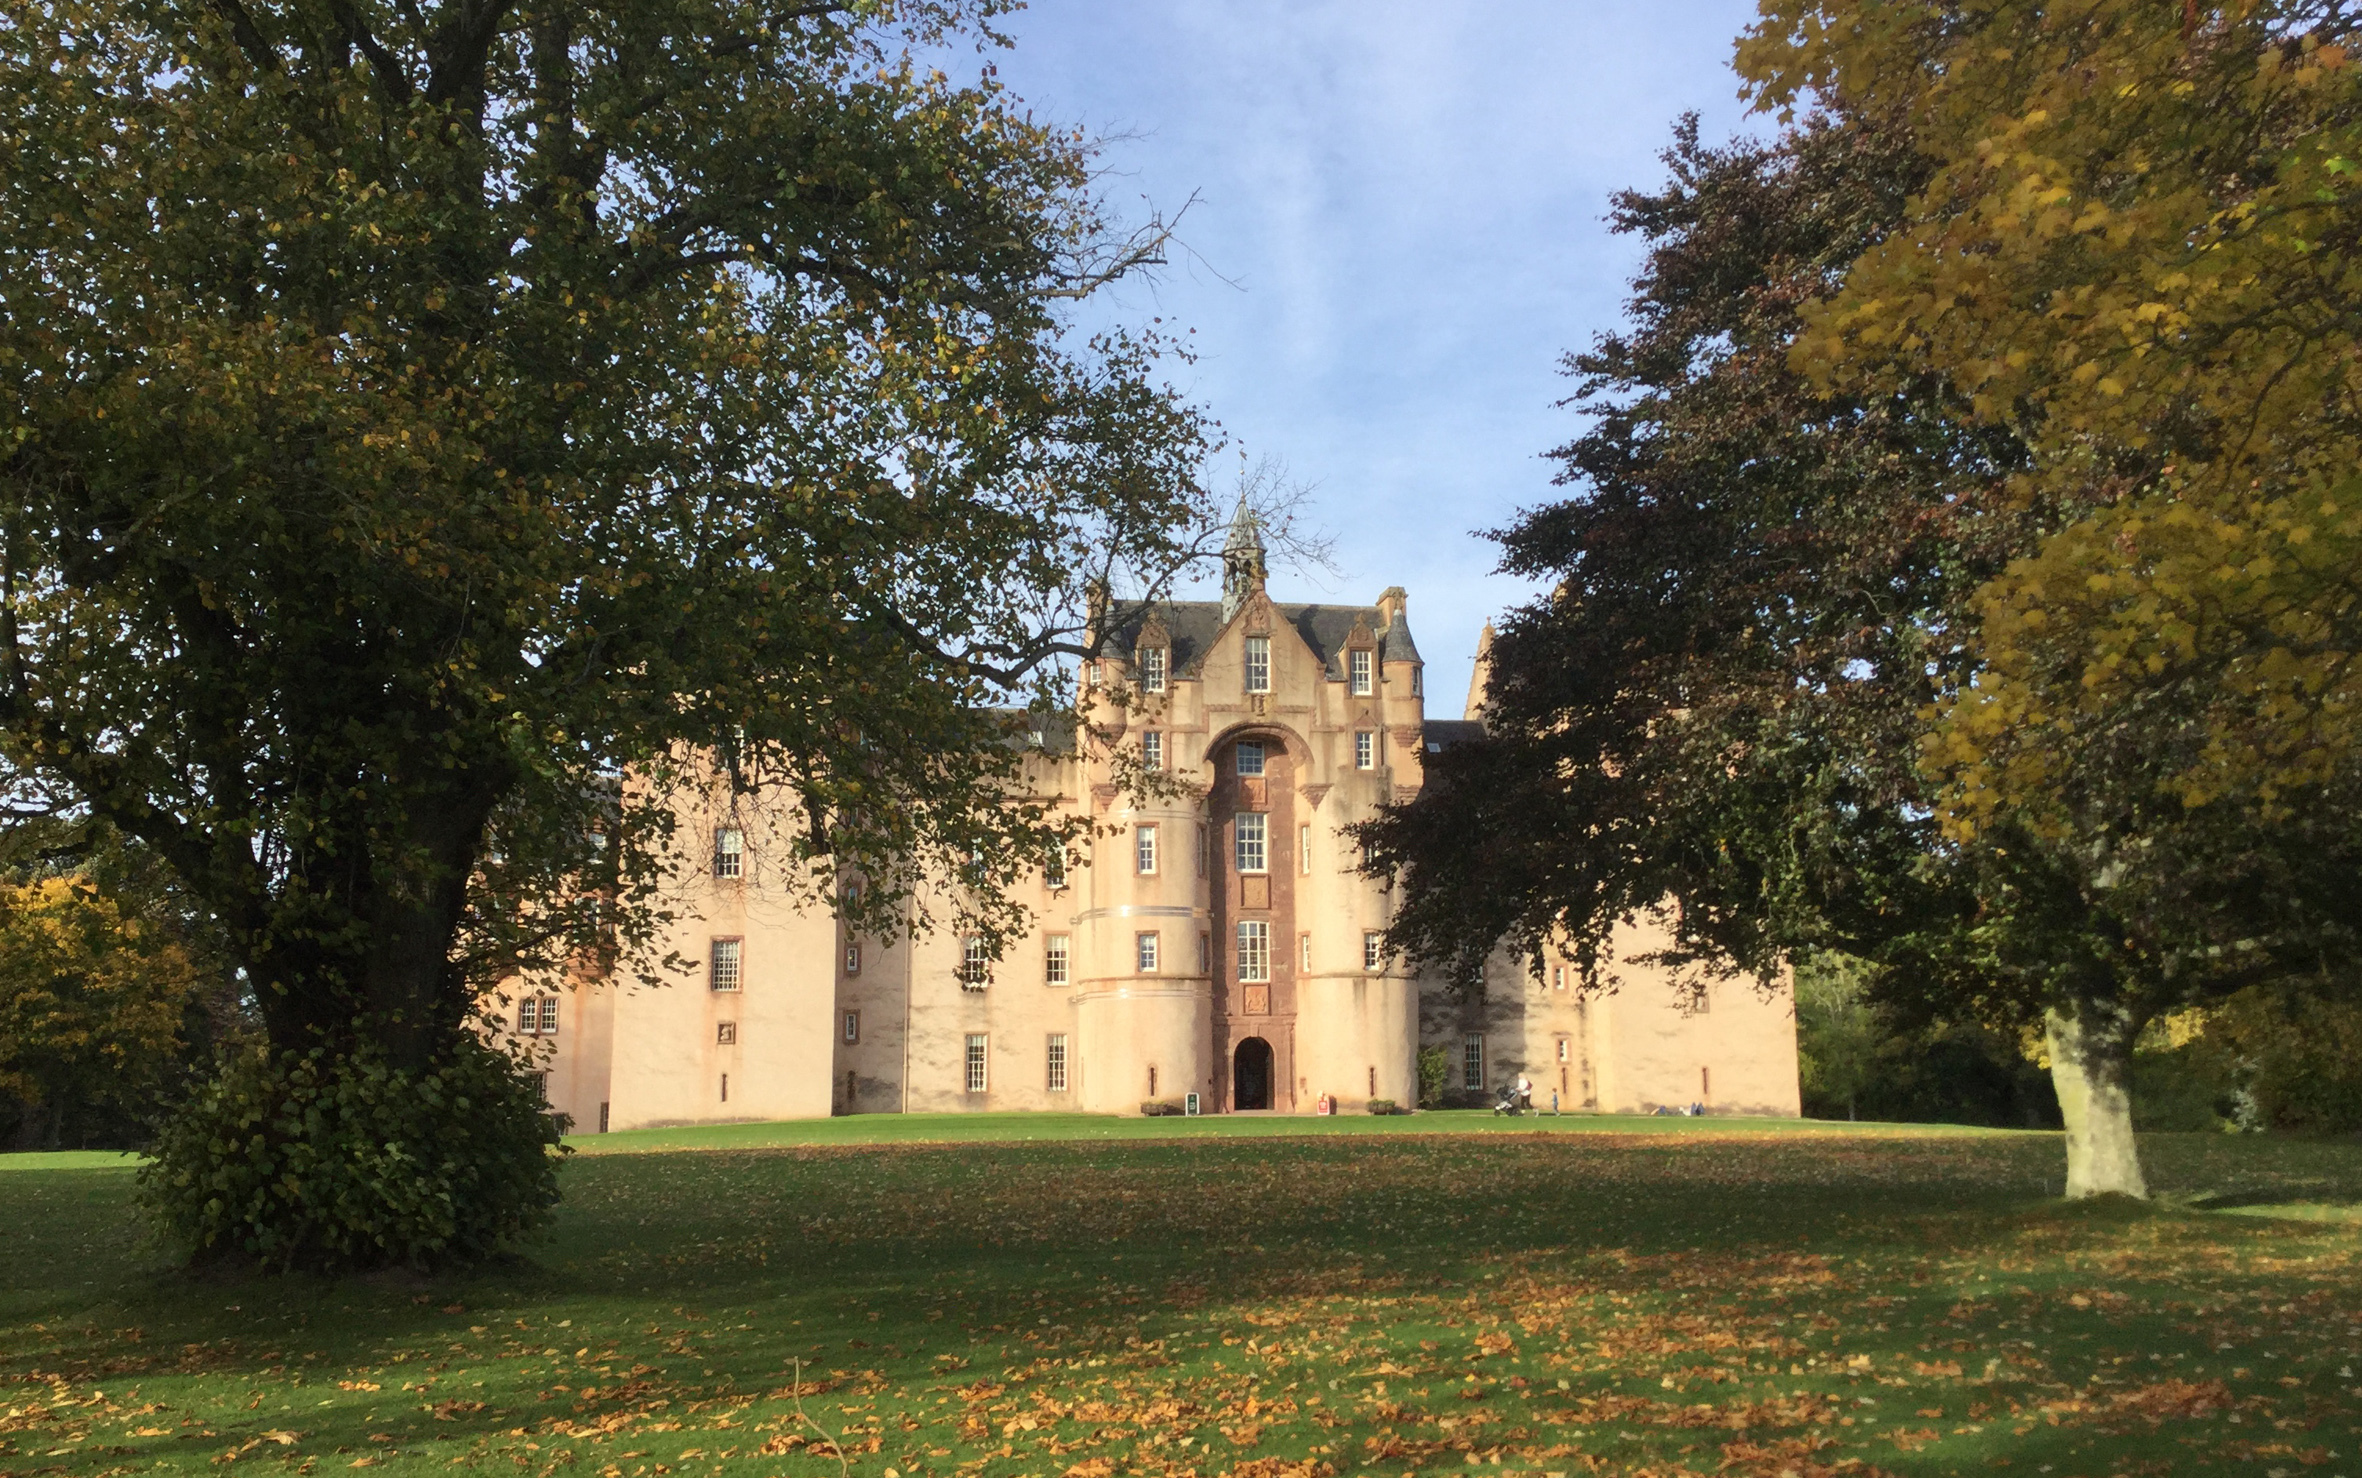 Fyvie Castle on Sunday. George Murray Westhill